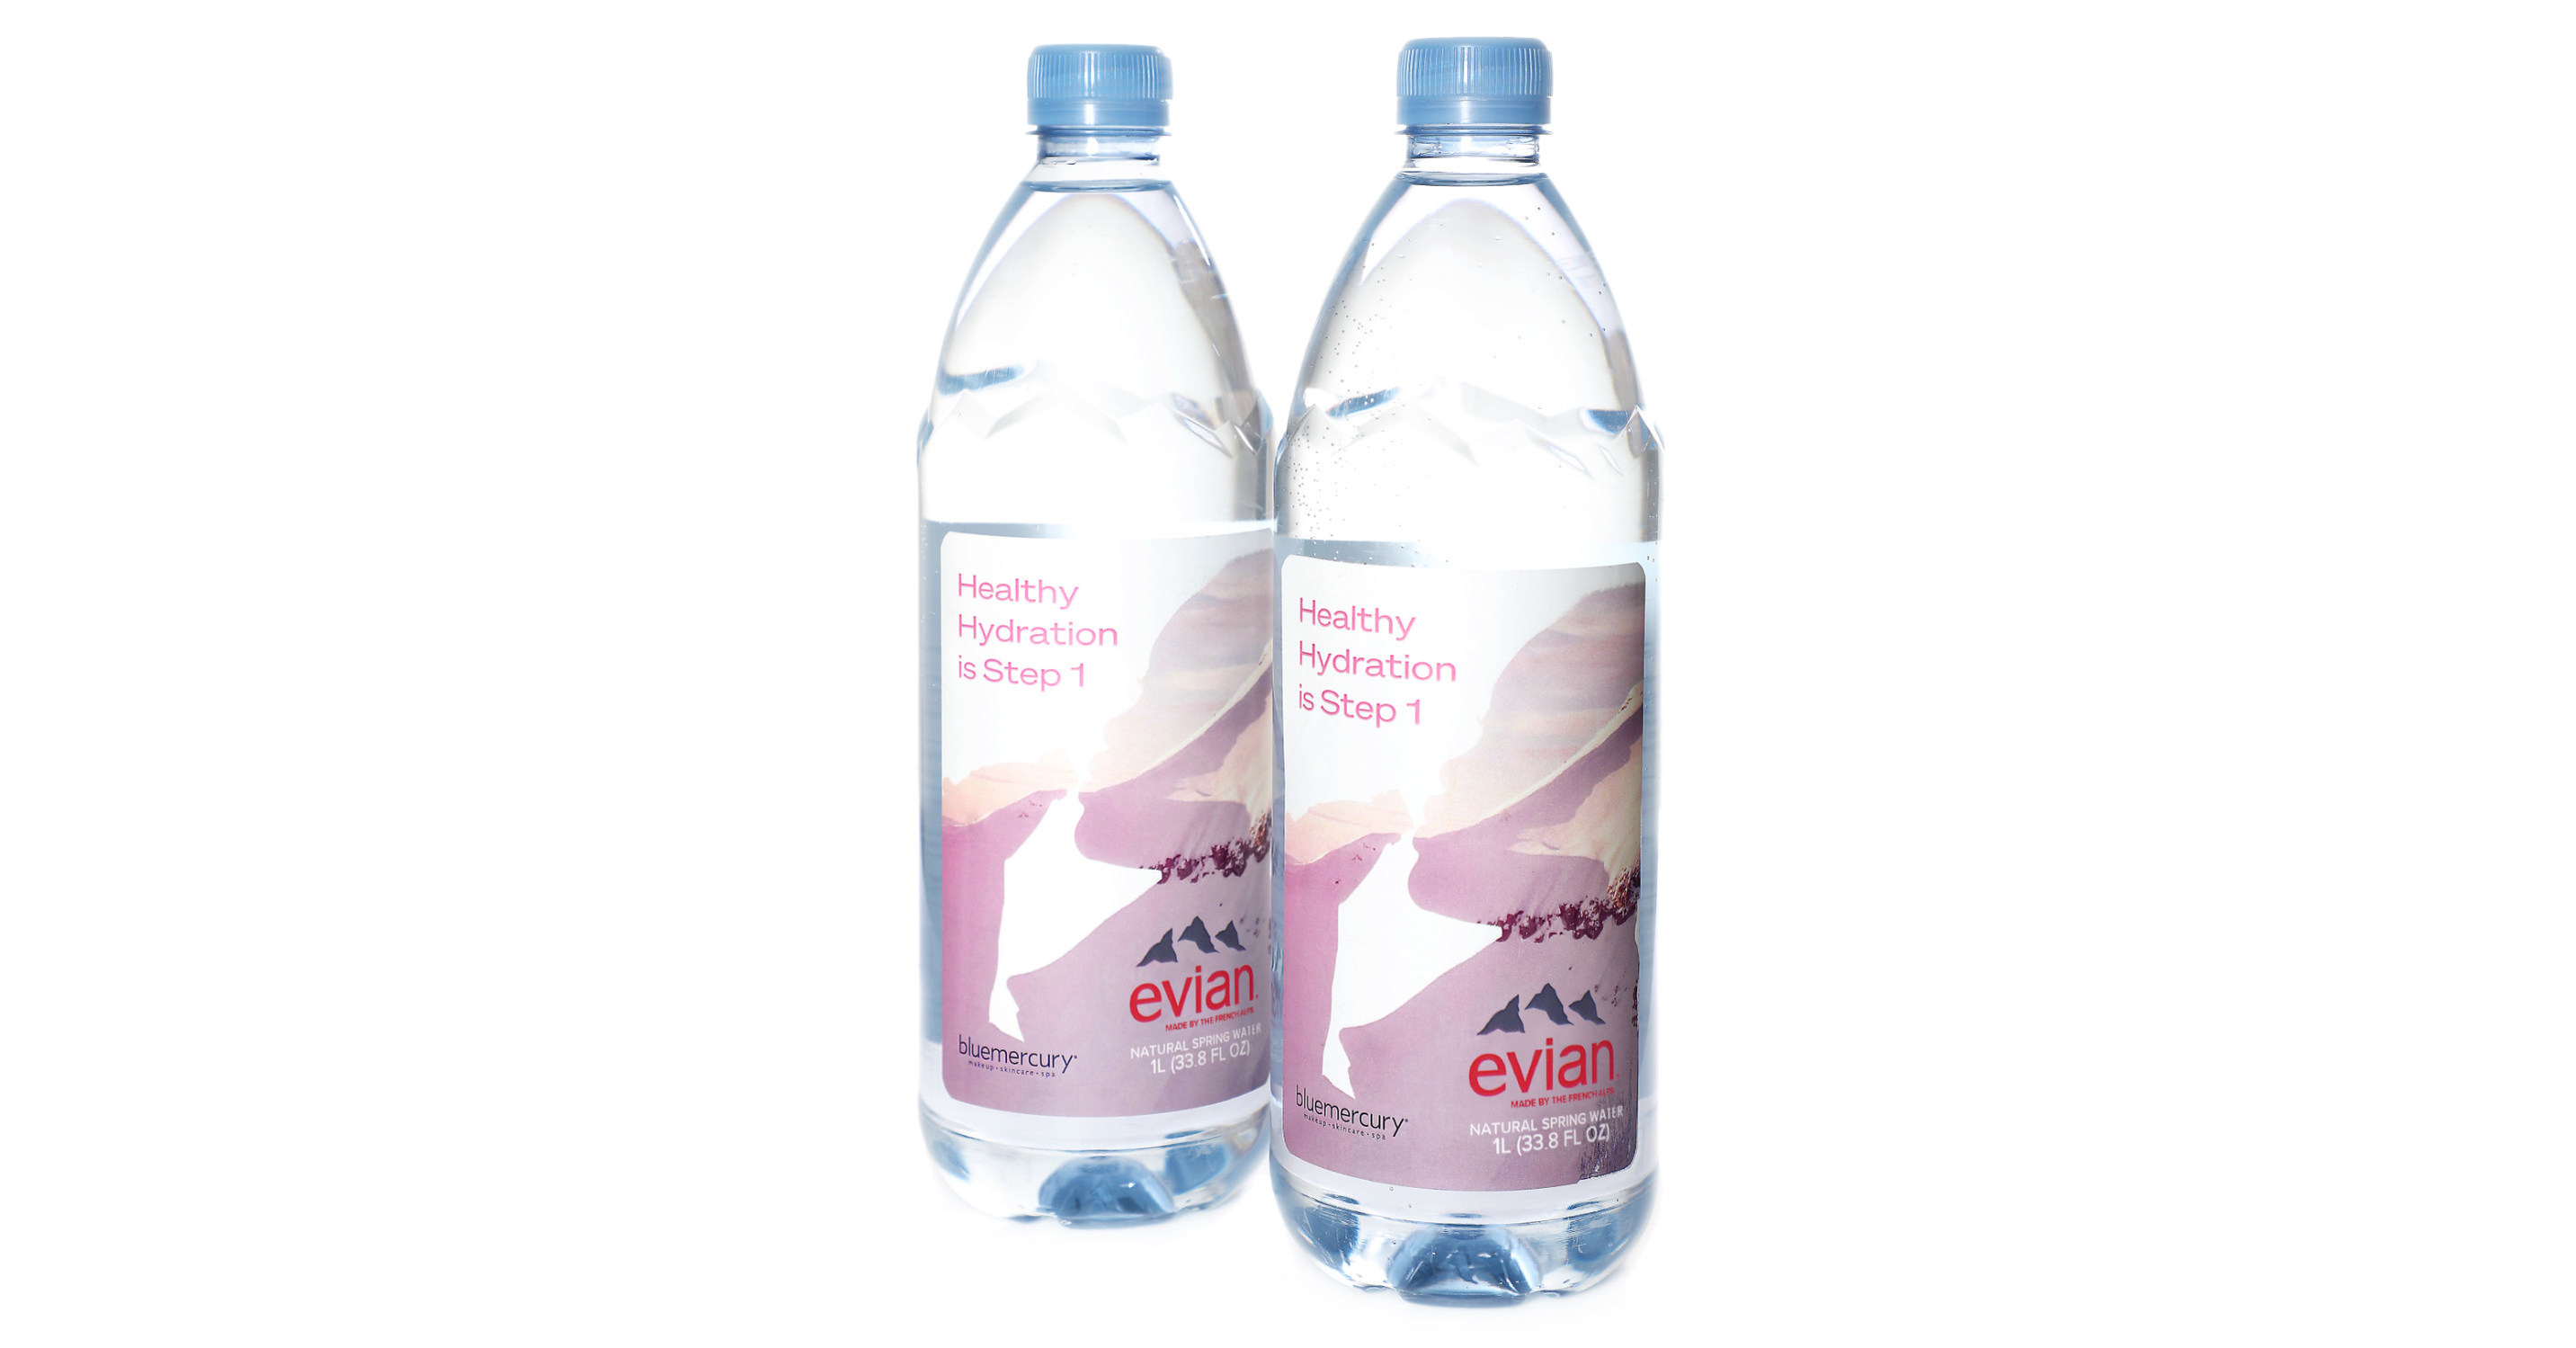 evian Water Is Now Alongside Your Beauty and Wellness Must-Haves